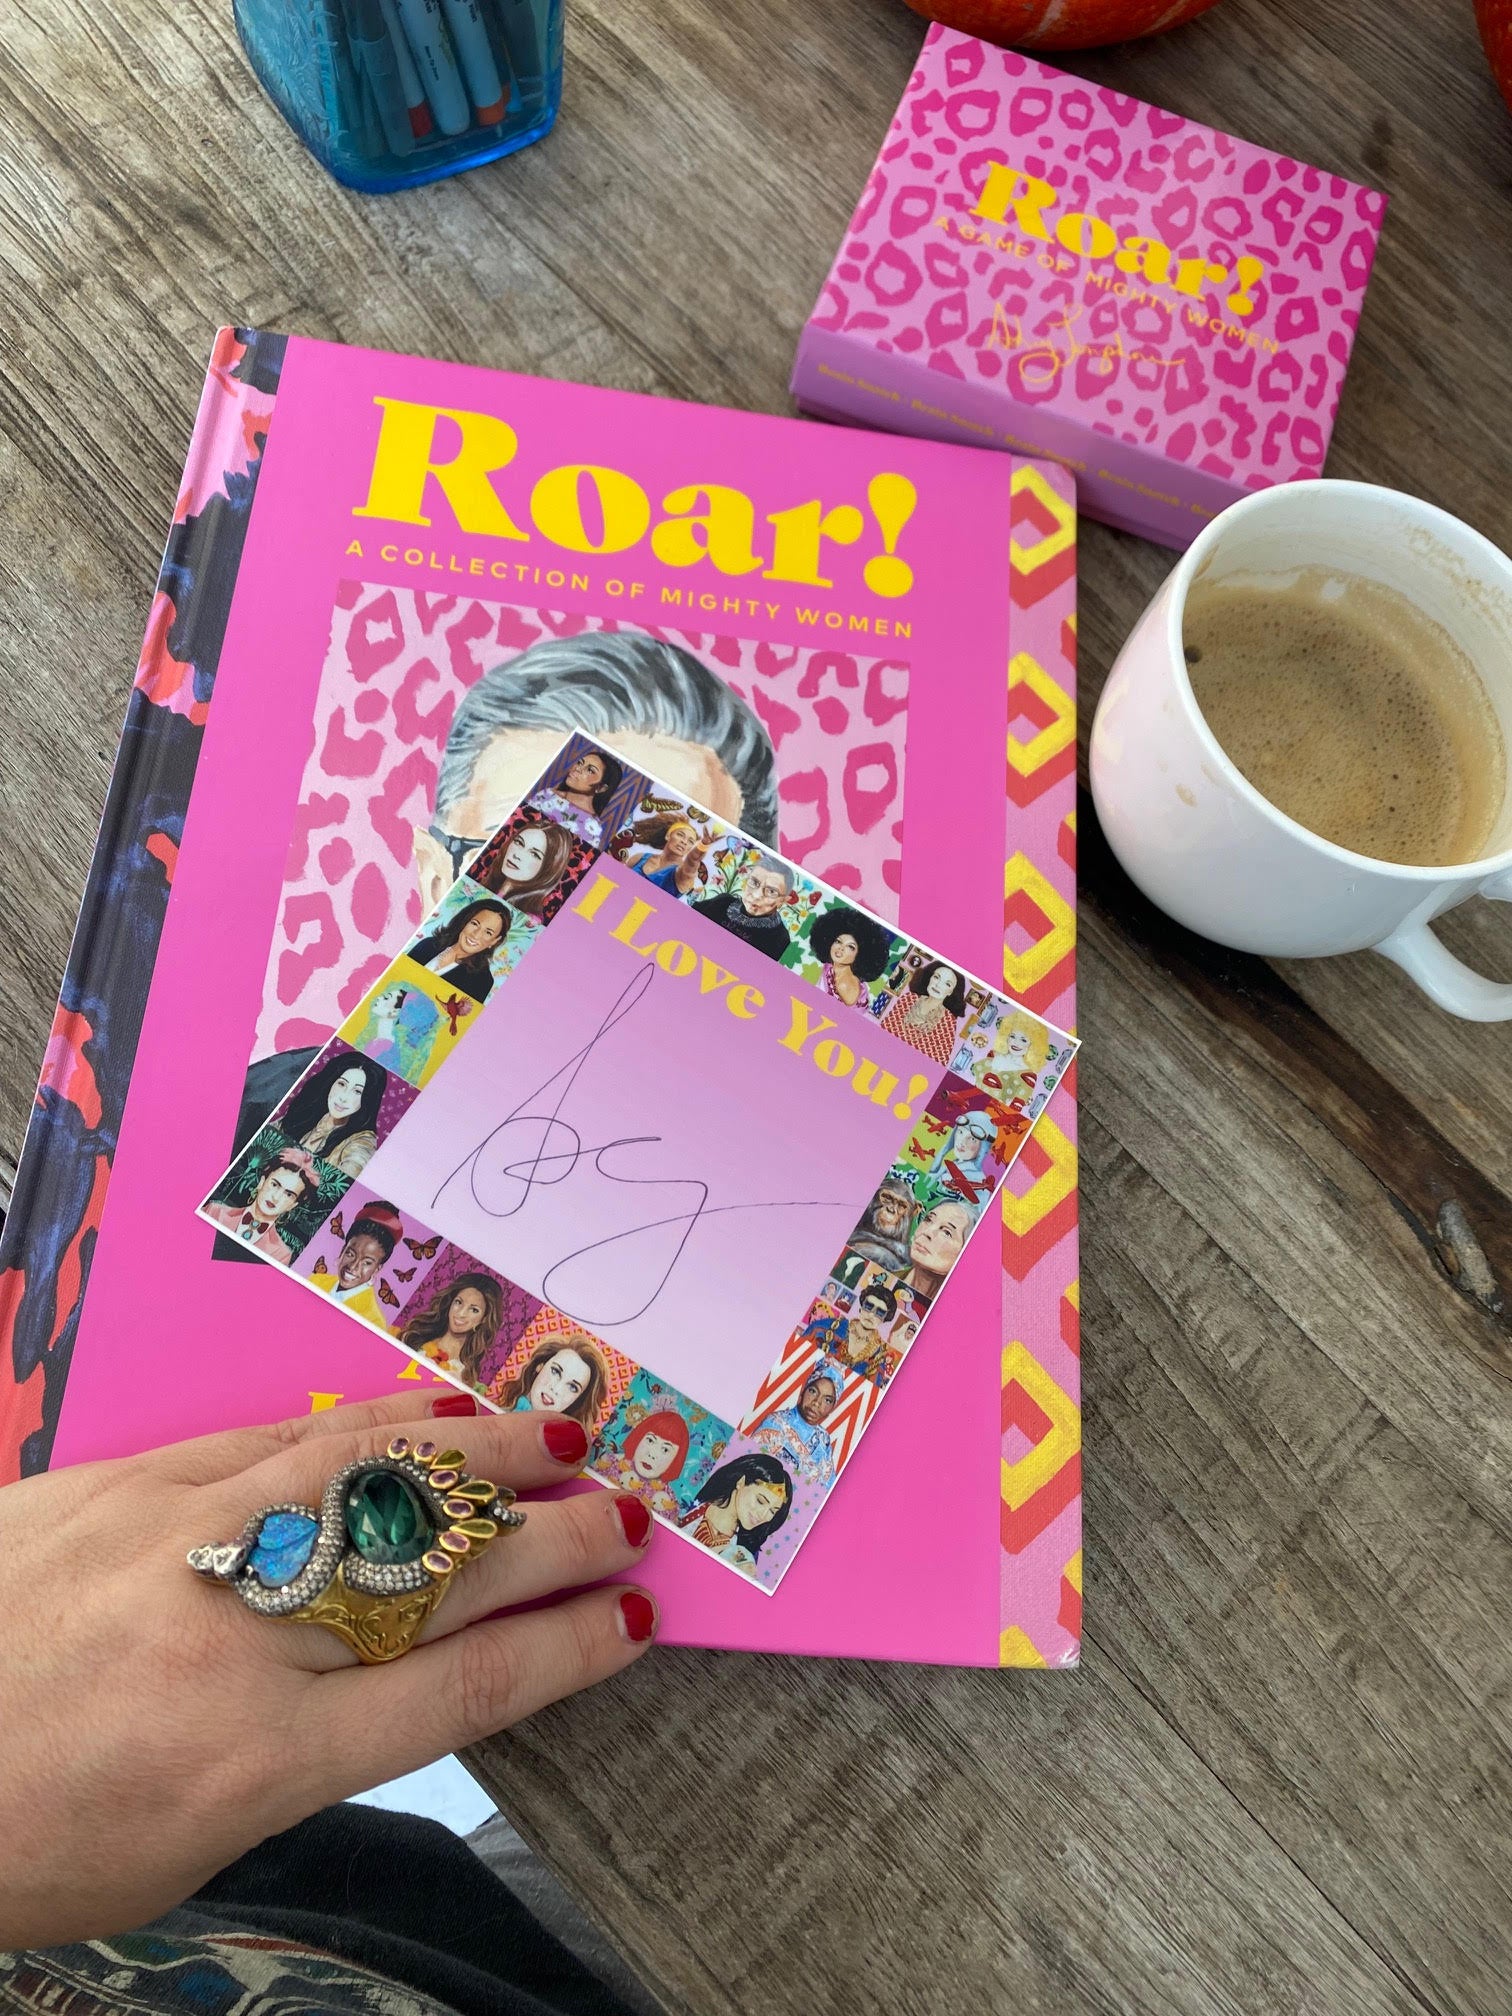 Signed Copy of Roar!: A Collection of Mighty Women